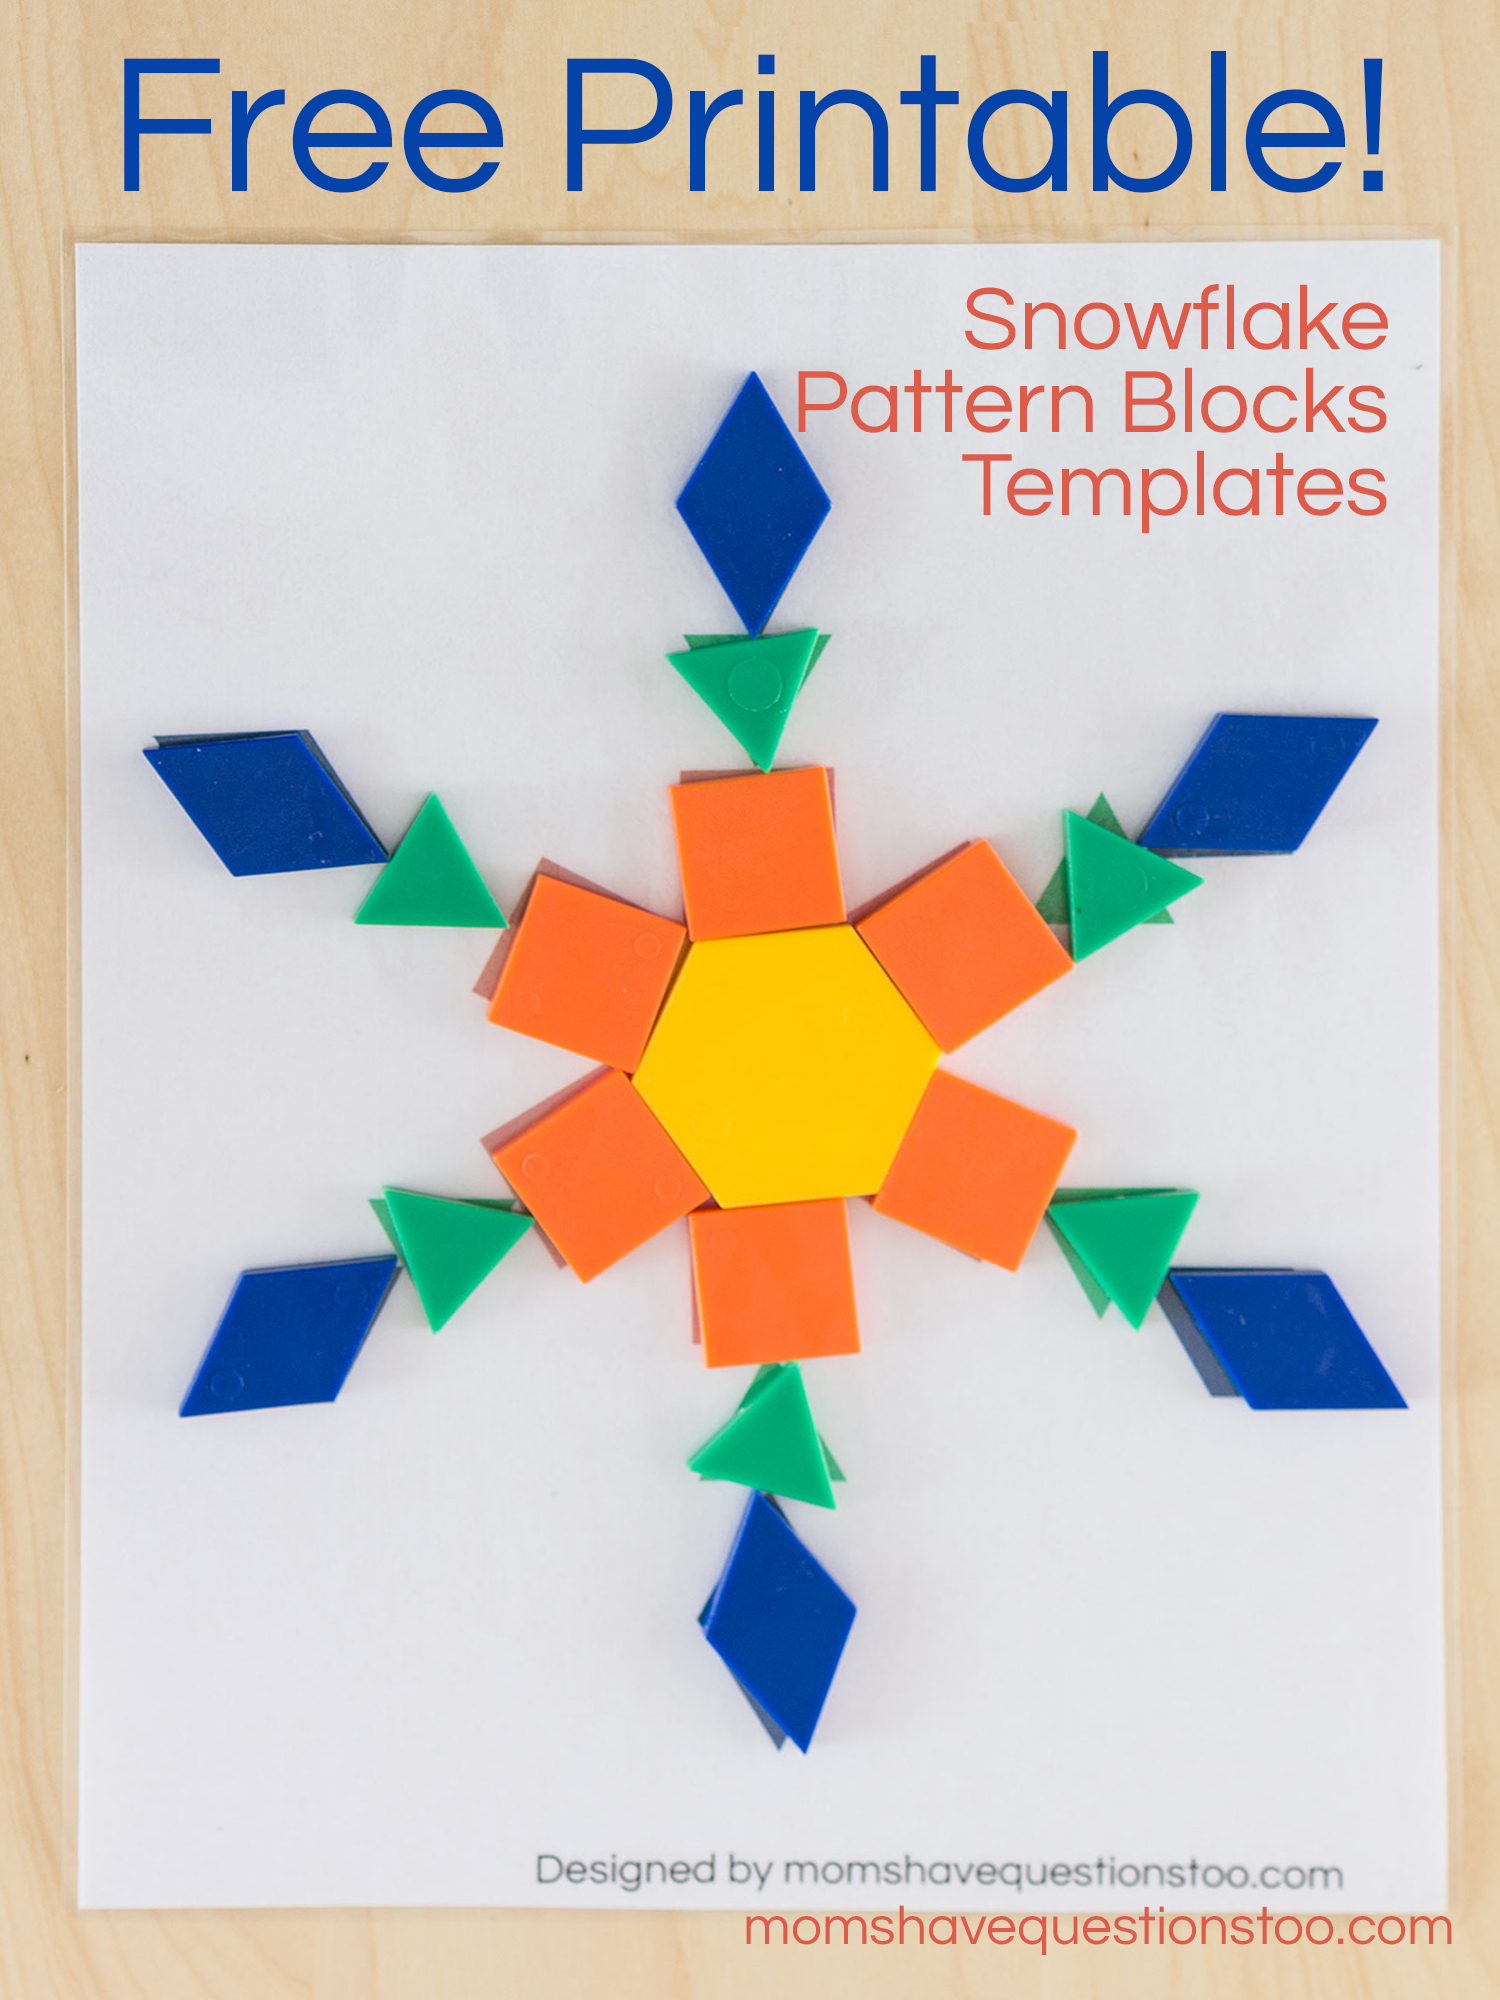 Snowflake Pattern Blocks Templates - Moms Have Questions Too